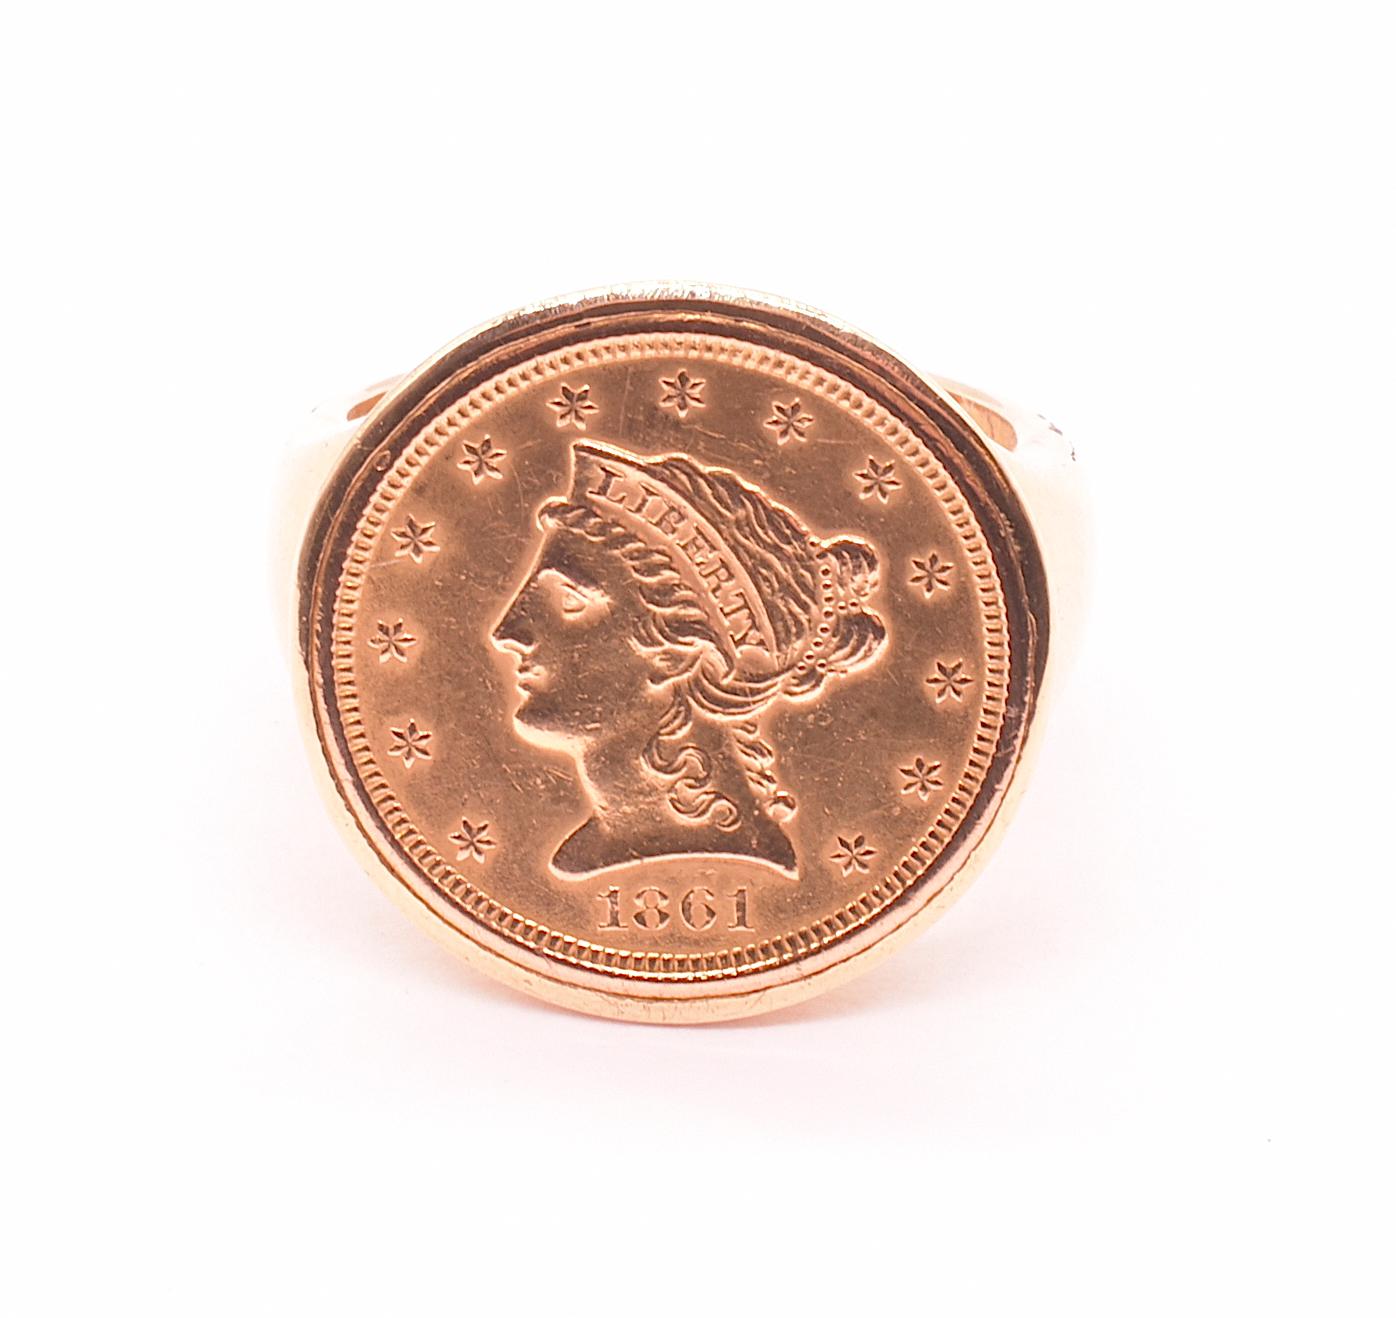 This ring is an interesting crossover between American Colonial and English Victorian.  The ring has as its face a  $2.50 Coronet head Liberty coin from 1861 and is wrapped in a polished 18K English mount. Minted in Denver, our American Liberty coin